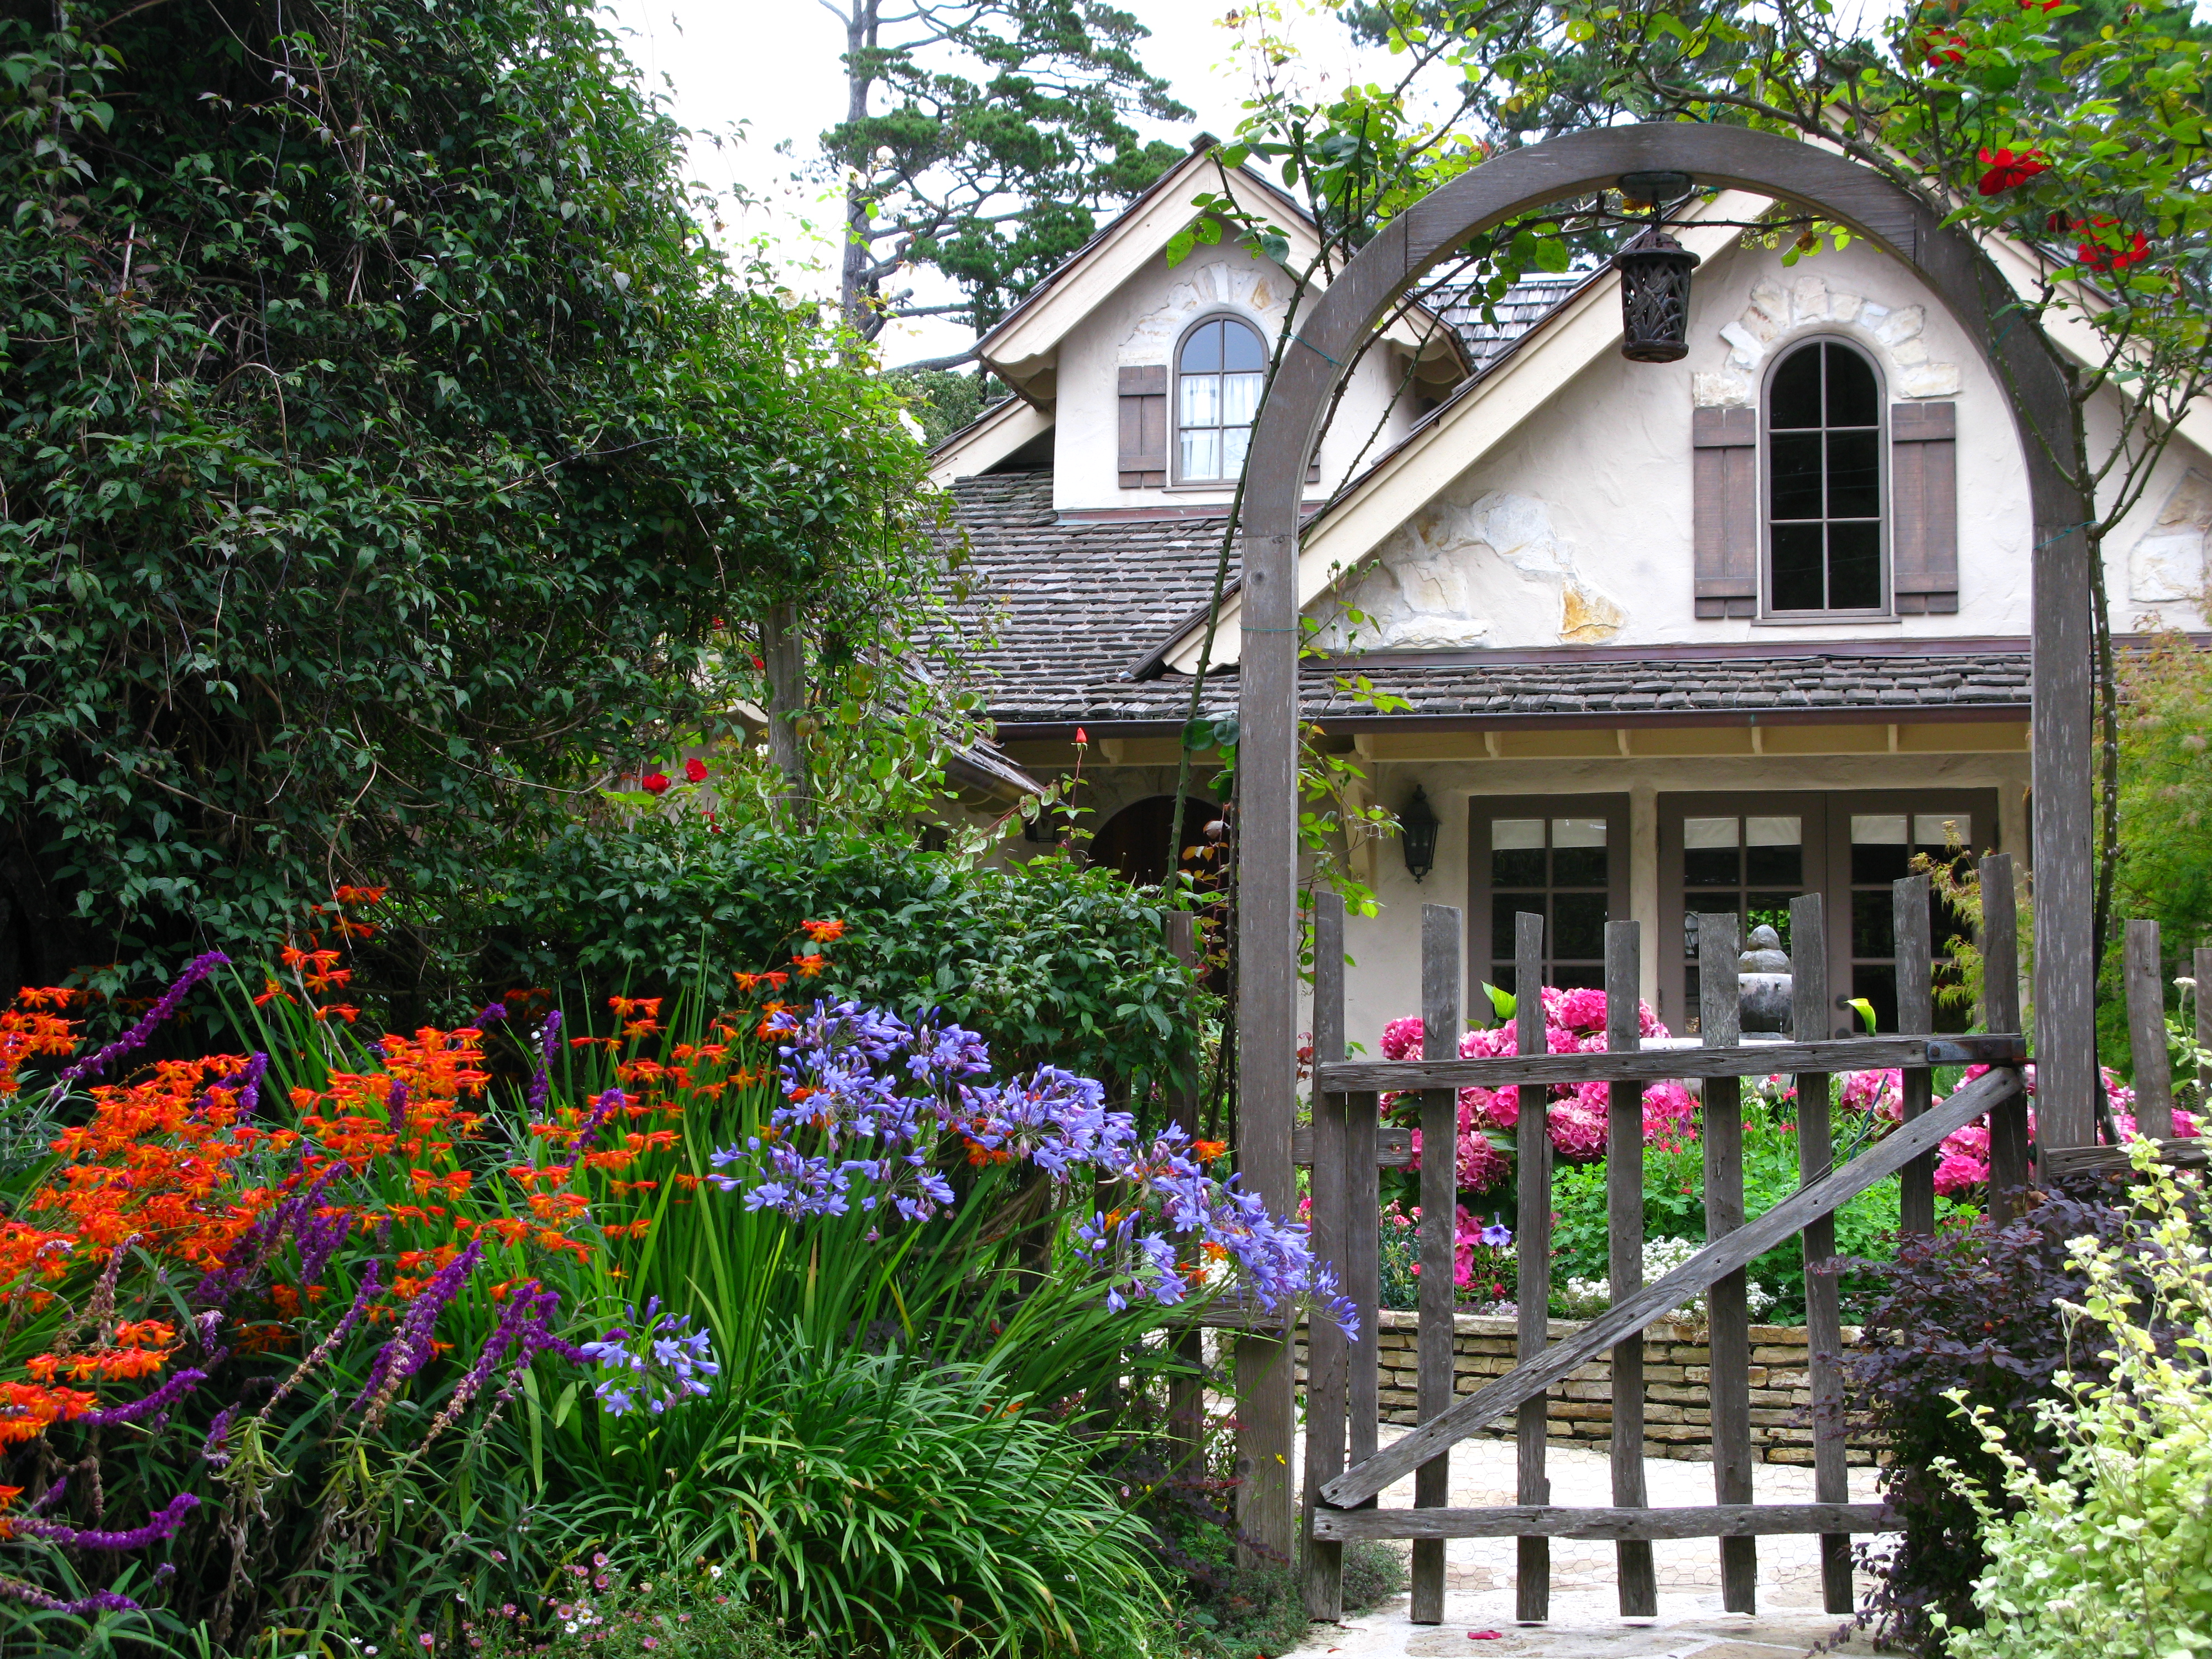 CARMEL'S COTTAGE GARDENS | Once upon a time..Tales from Carmel by ...